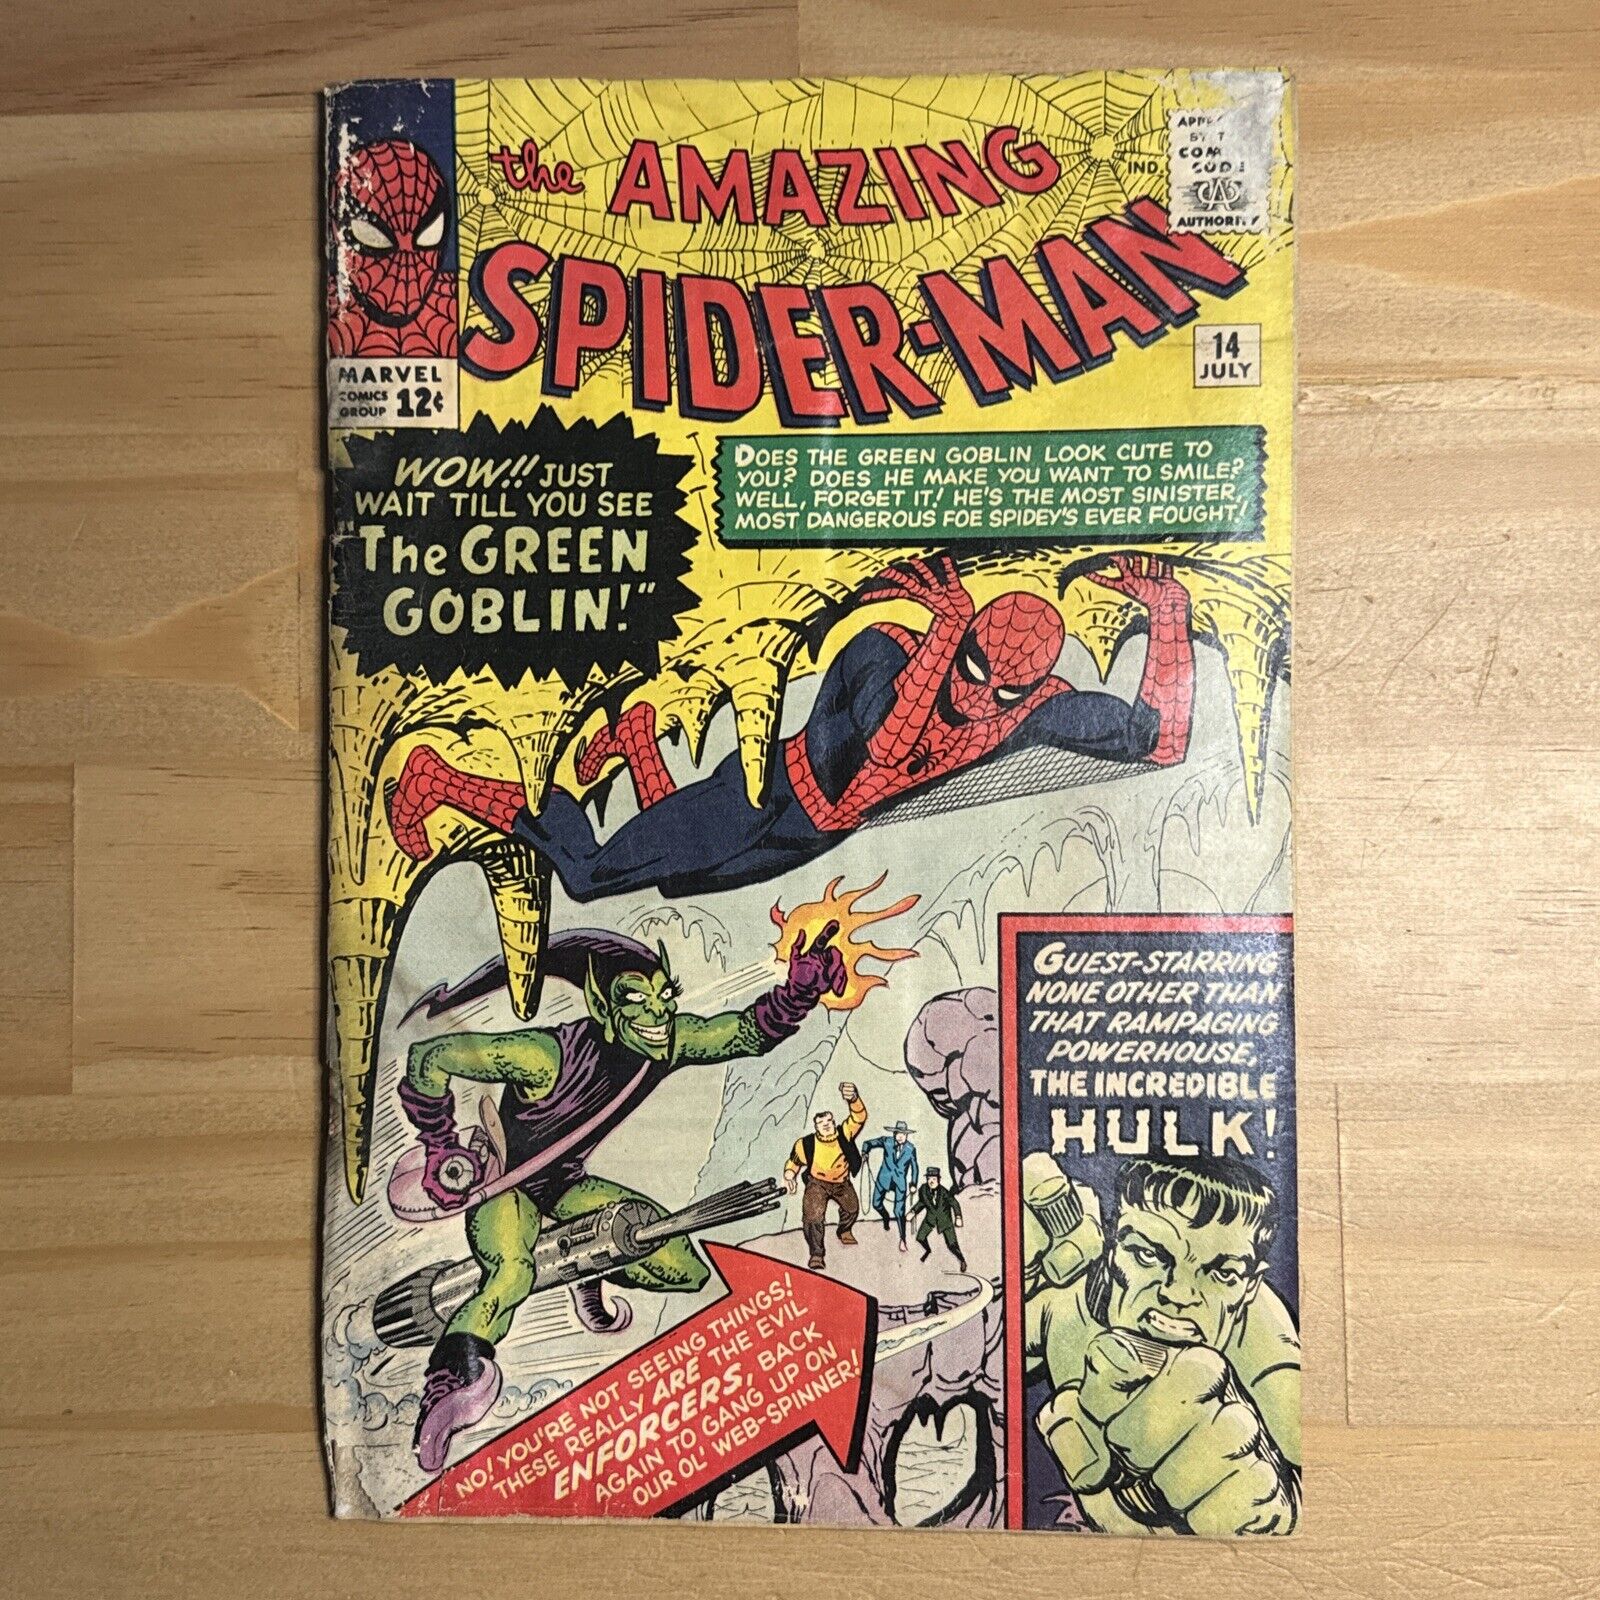 AMAZING SPIDER-MAN #14 1964 1ST APPEARANCE OF GREEN GOBLIN MARVEL COMICS